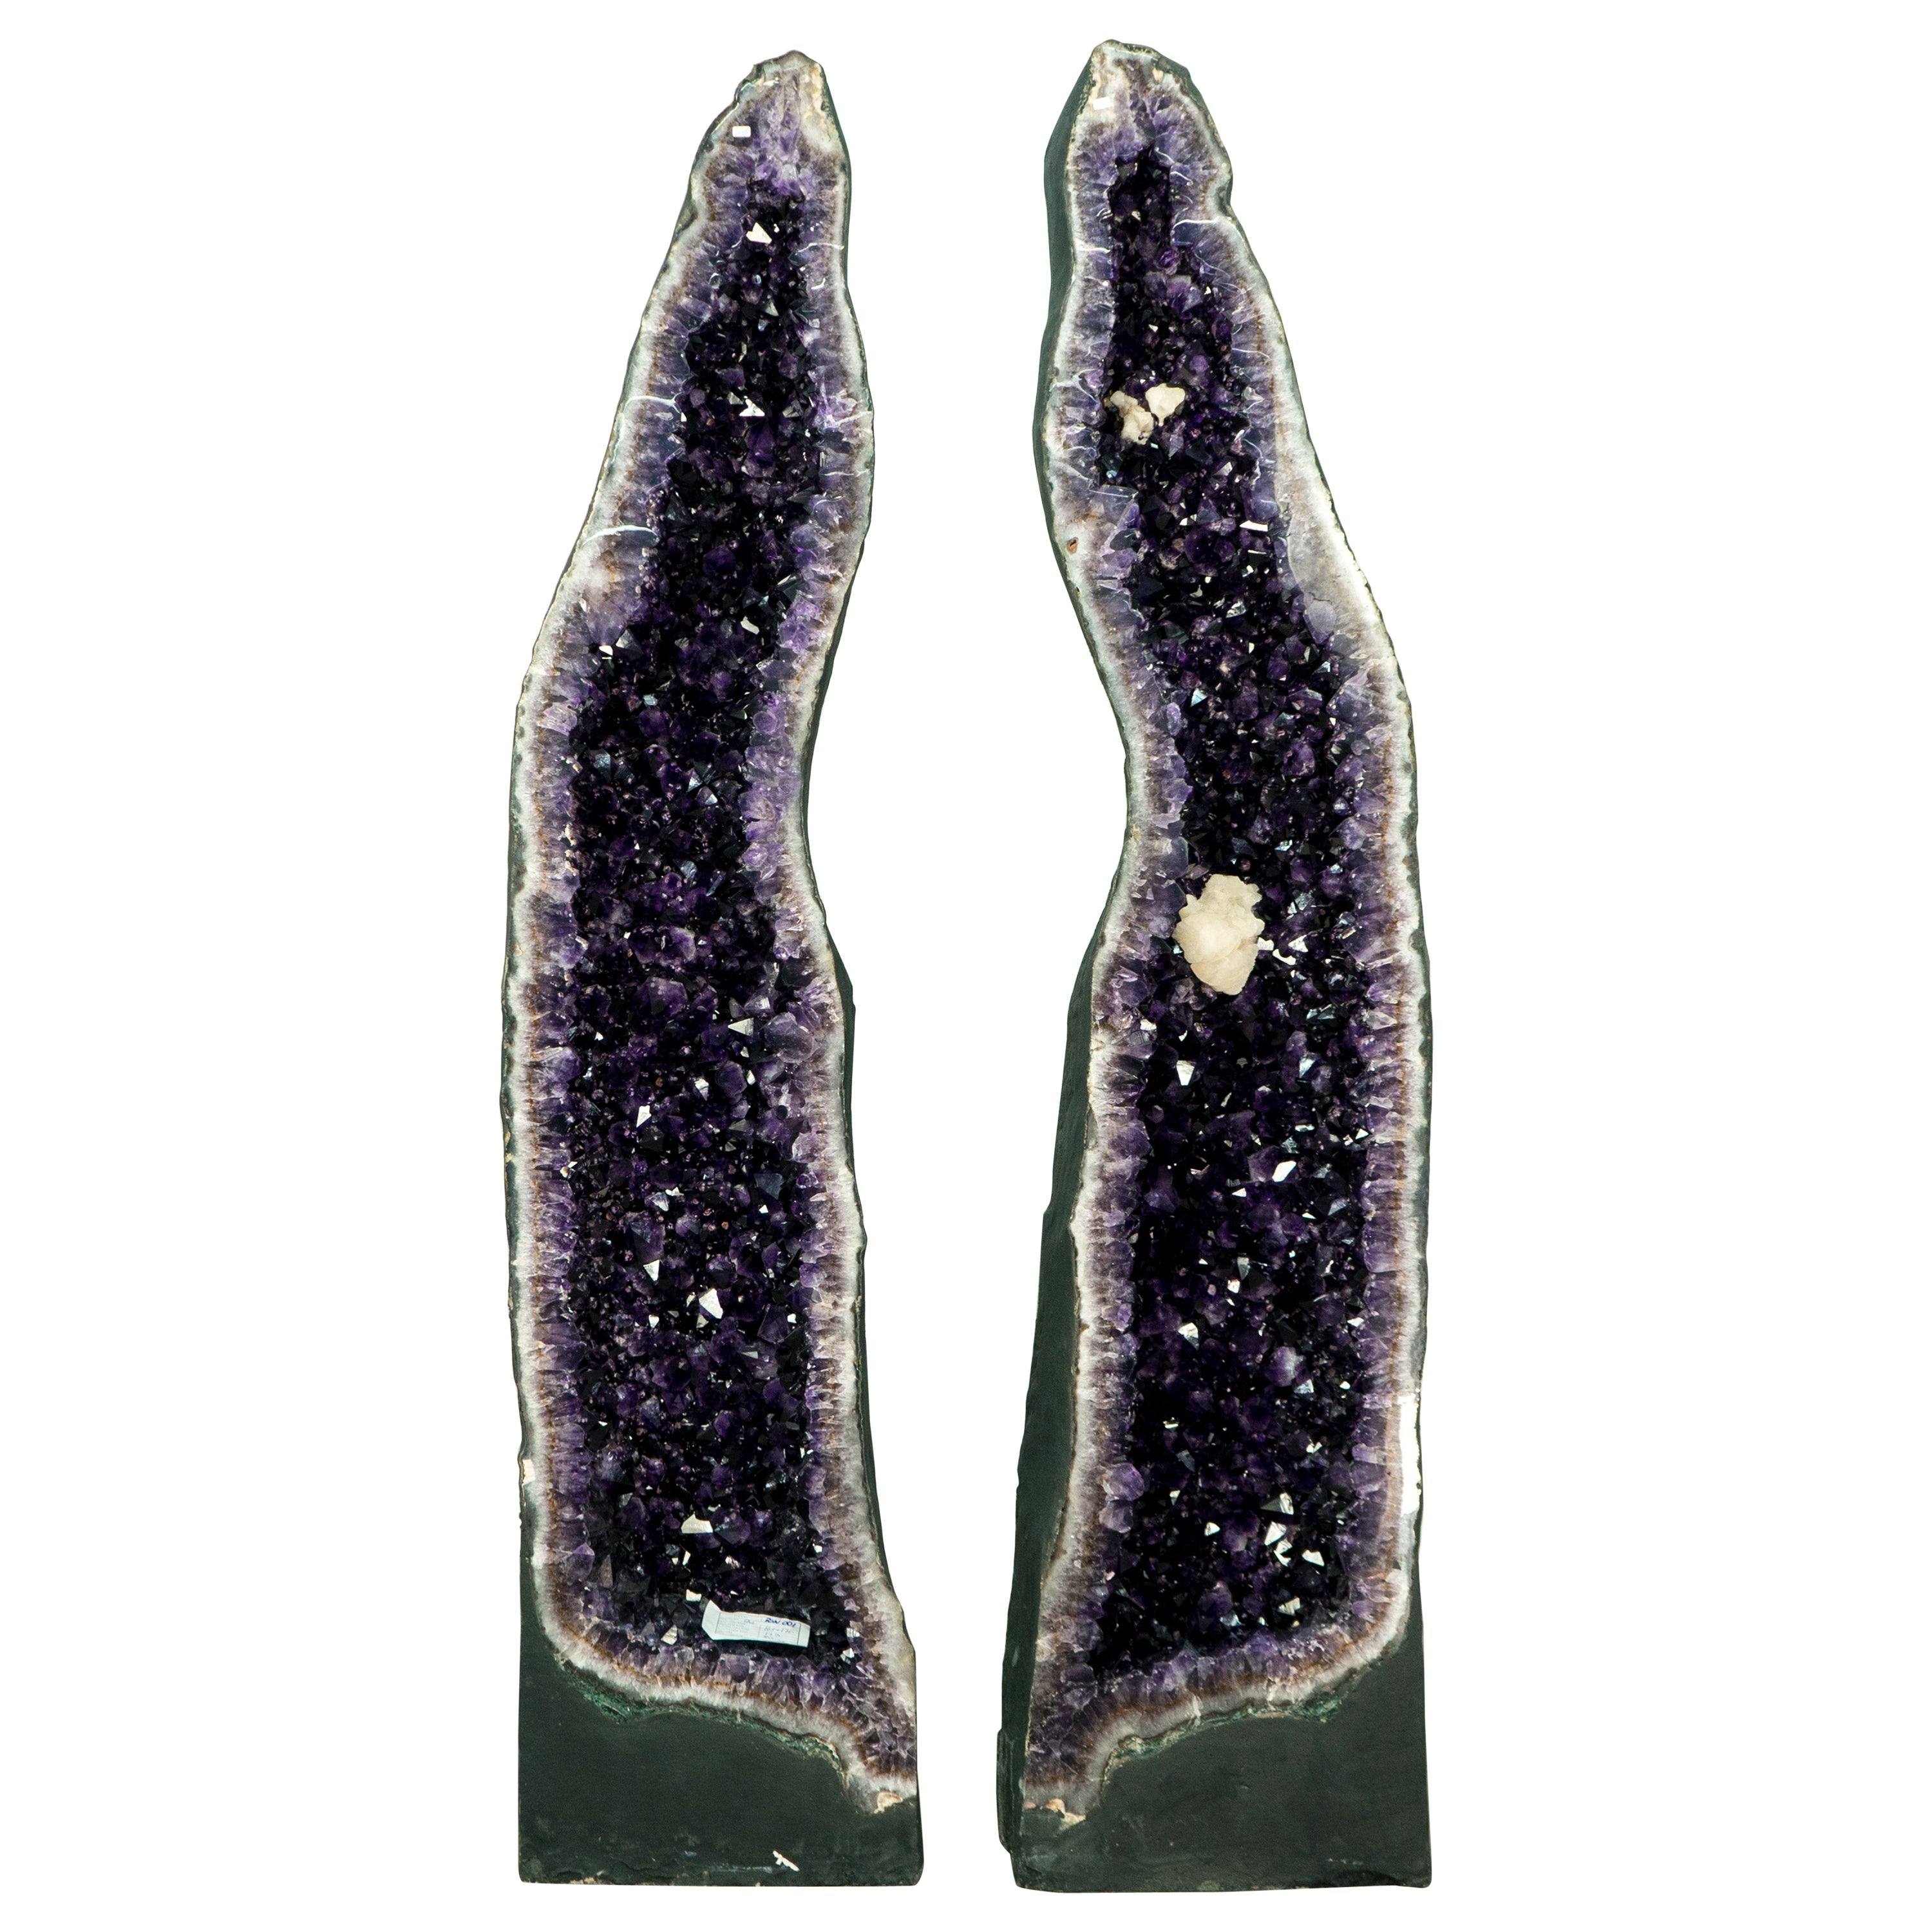 X-Large Tall Amethyst Cathedral Geodes Pair - 5.7 Ft, 750 Lb, with AAA Druzy For Sale